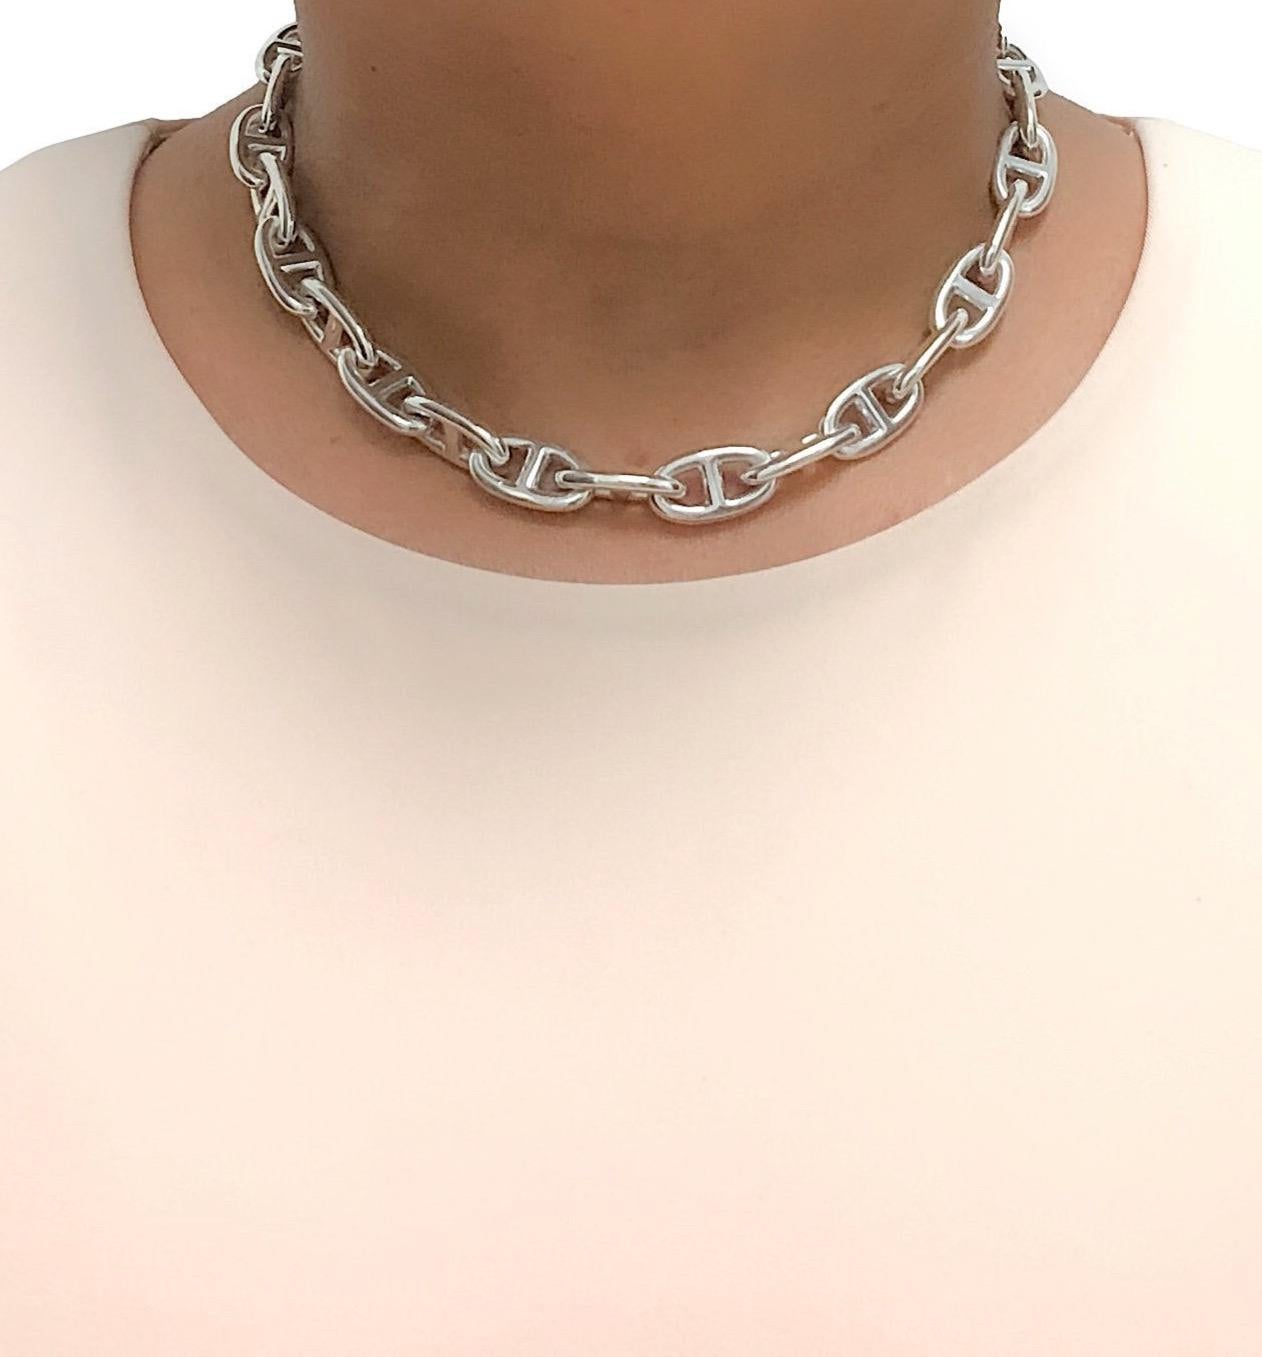 hermes chaine d'ancre silver necklace